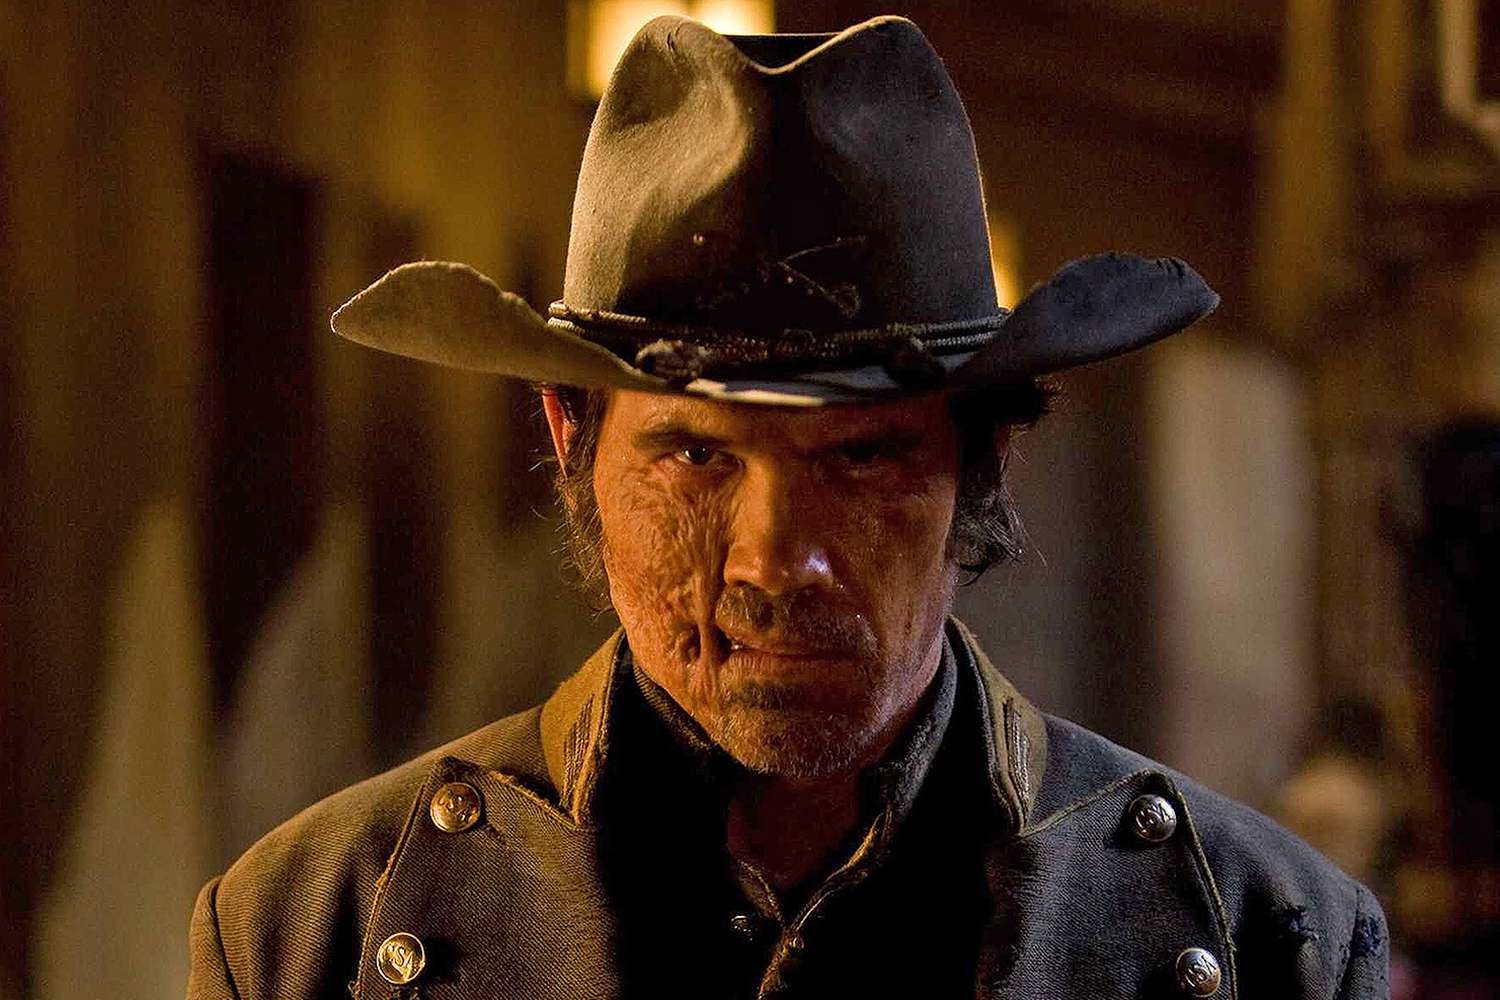 Josh Brolin absolutely hates Jonah Hex and continues bashing it